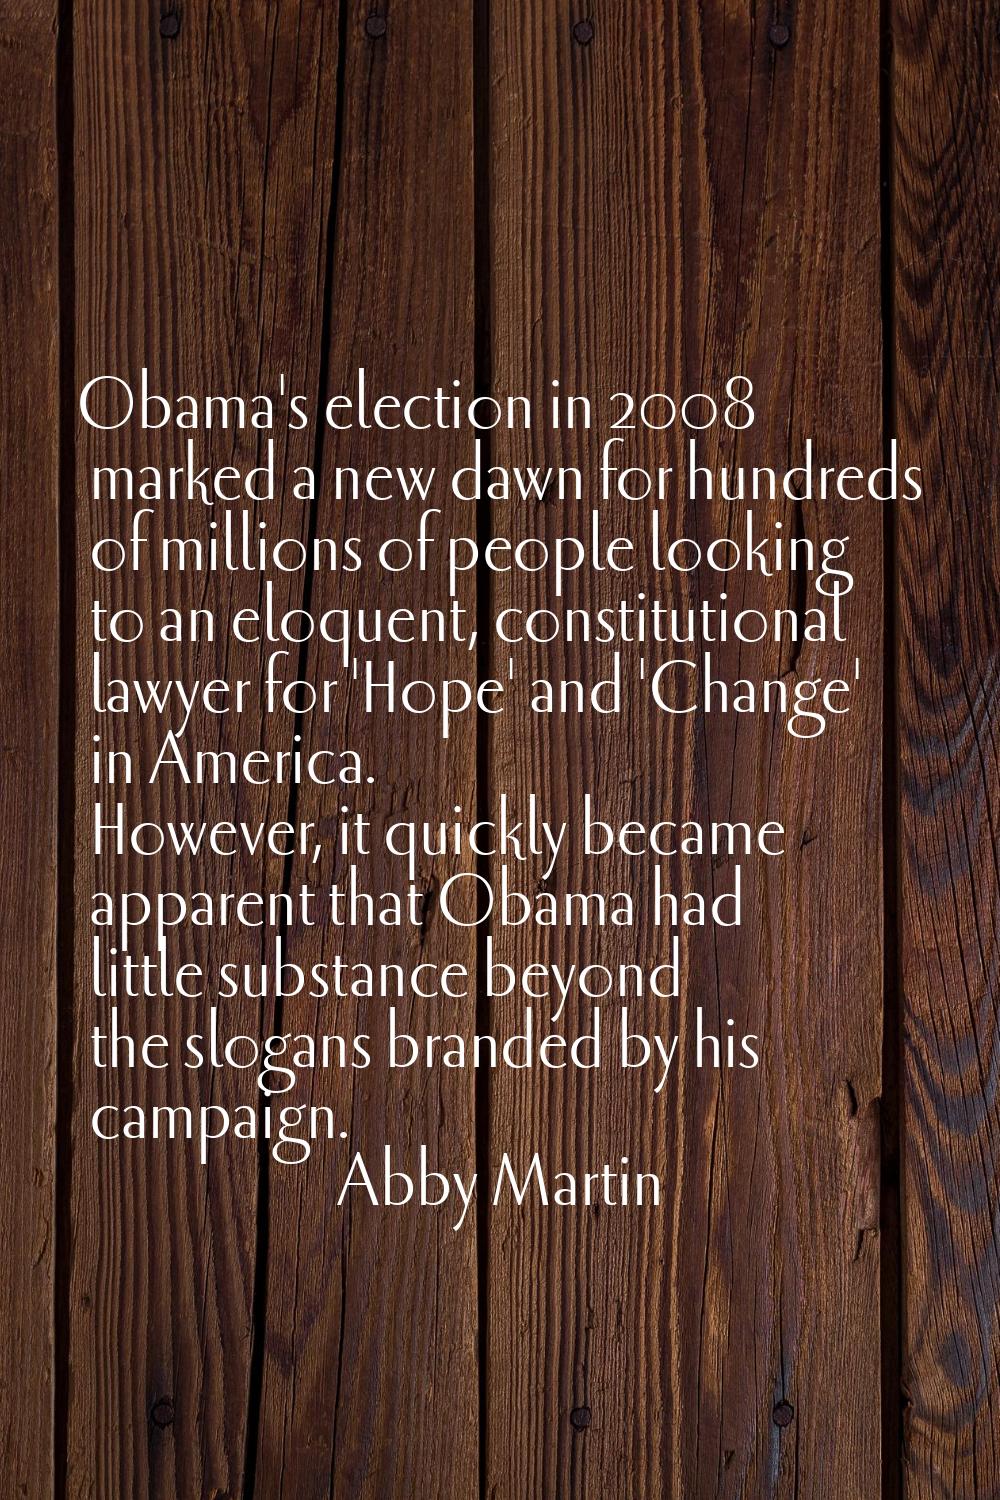 Obama's election in 2008 marked a new dawn for hundreds of millions of people looking to an eloquen